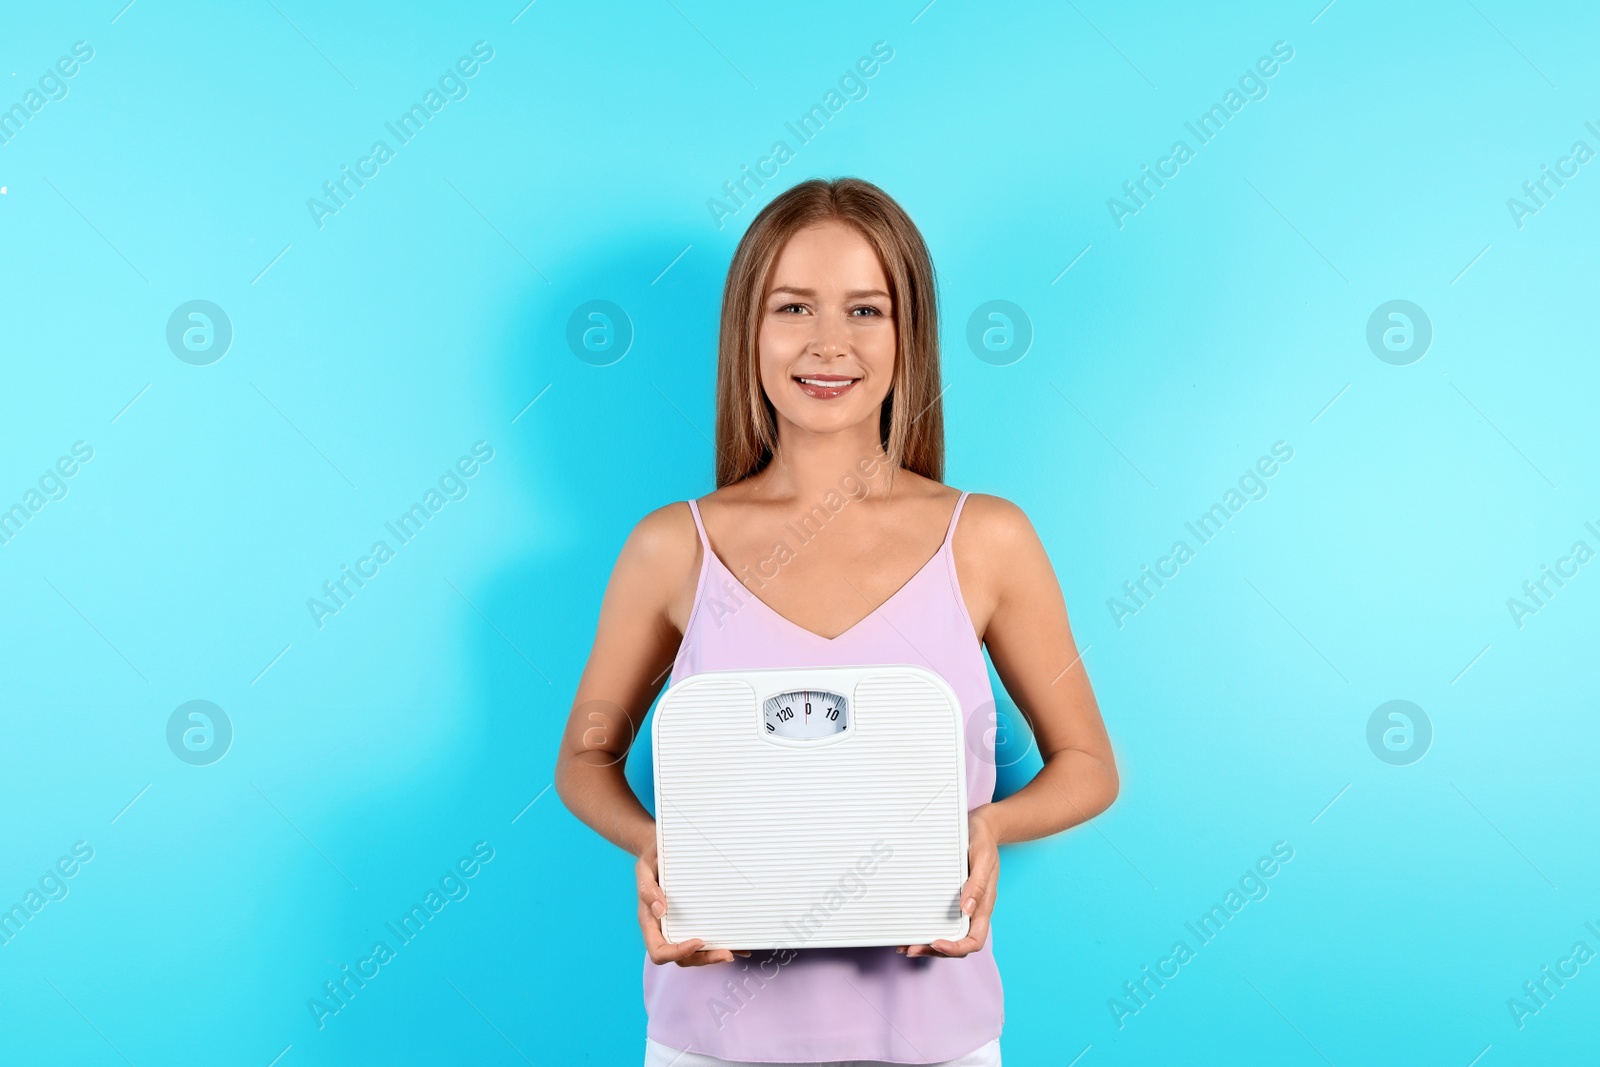 Photo of Slim woman with scale on color background. Healthy diet